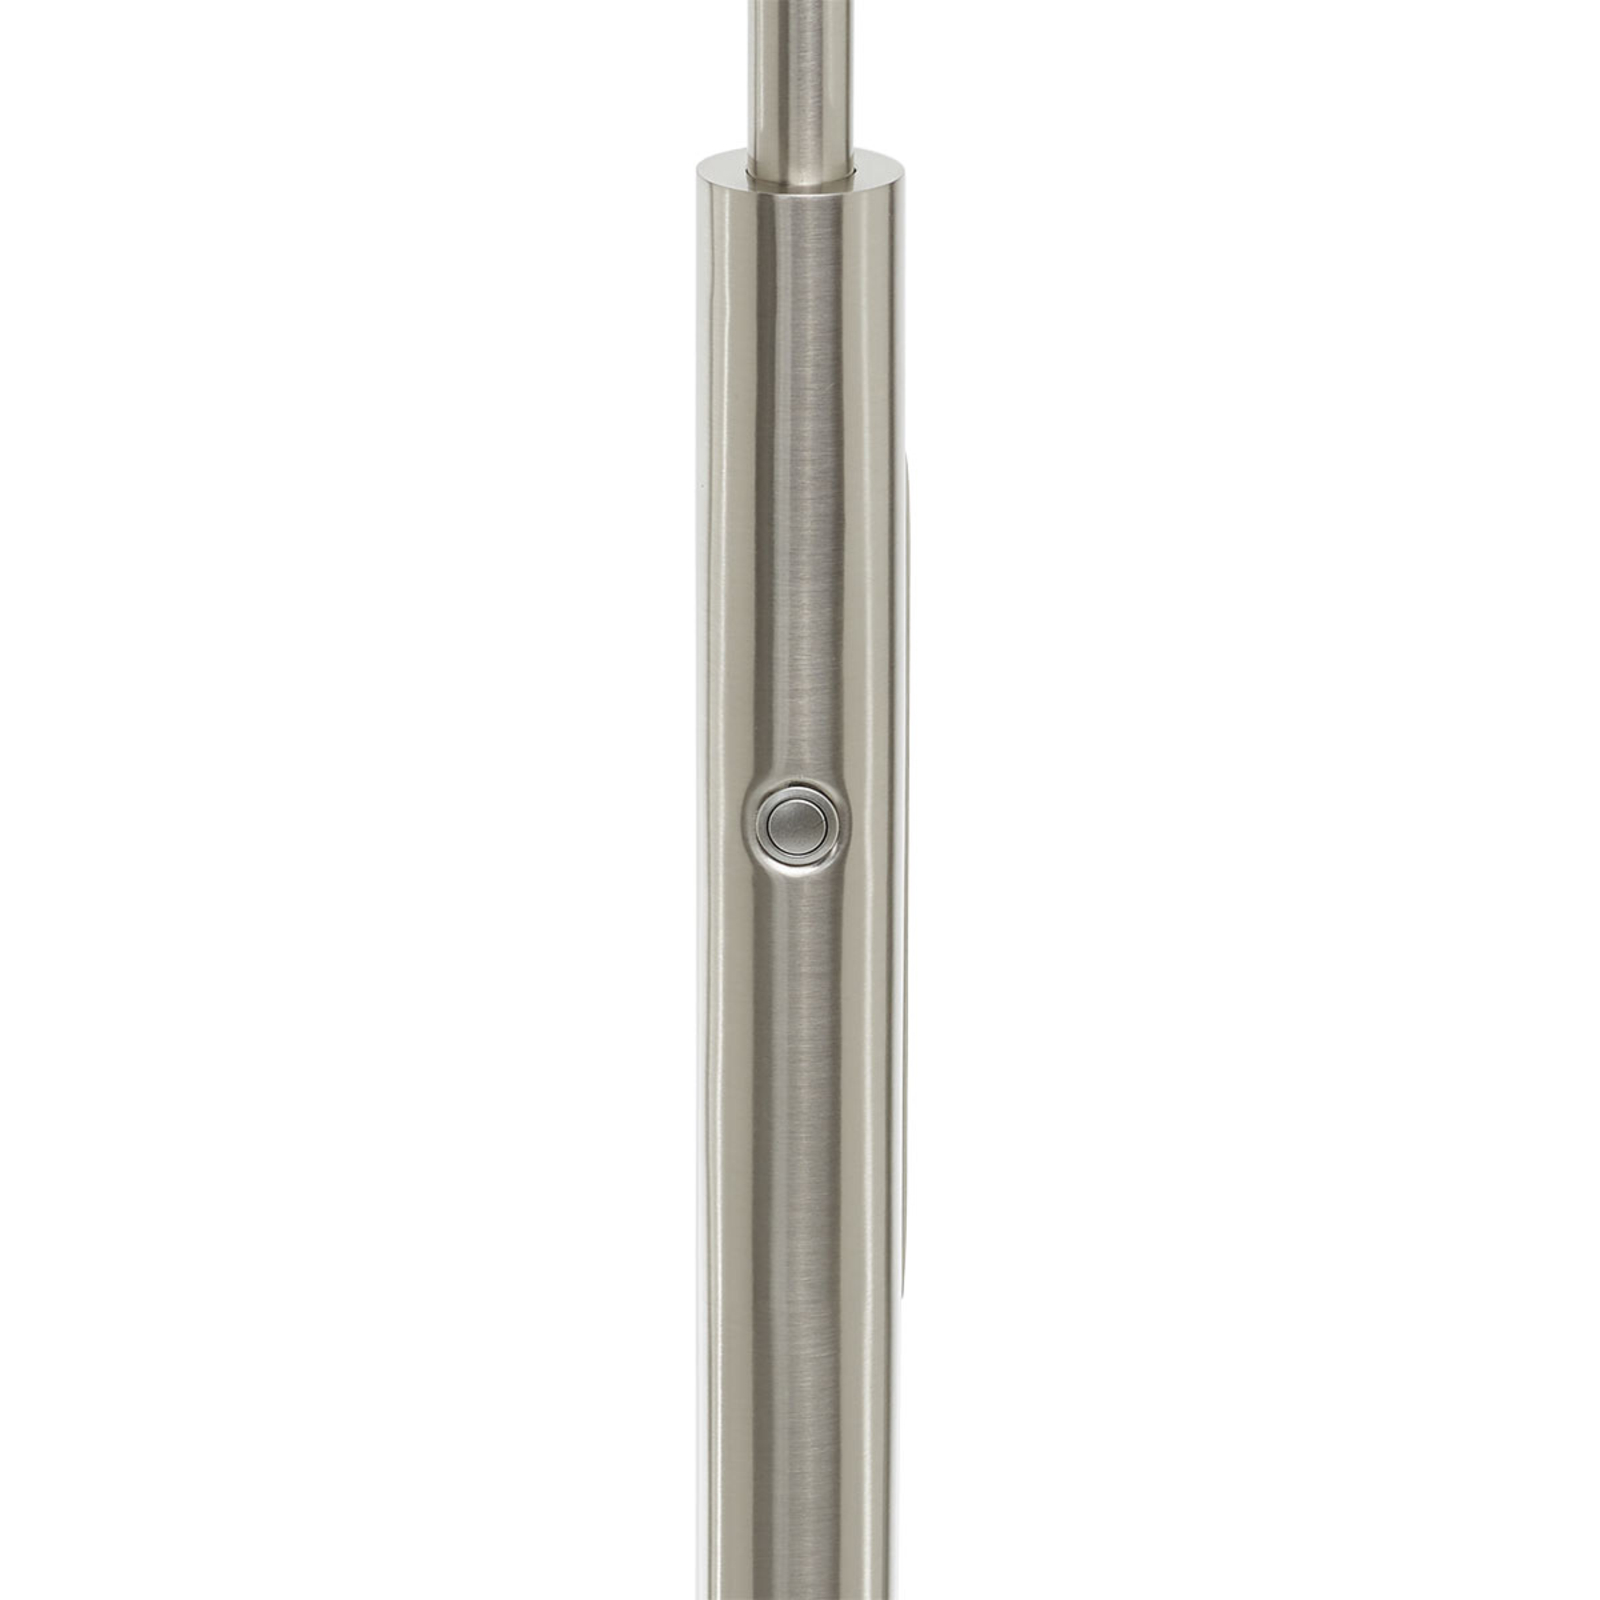 Sapporo LED floor lamp with two-part lampshade